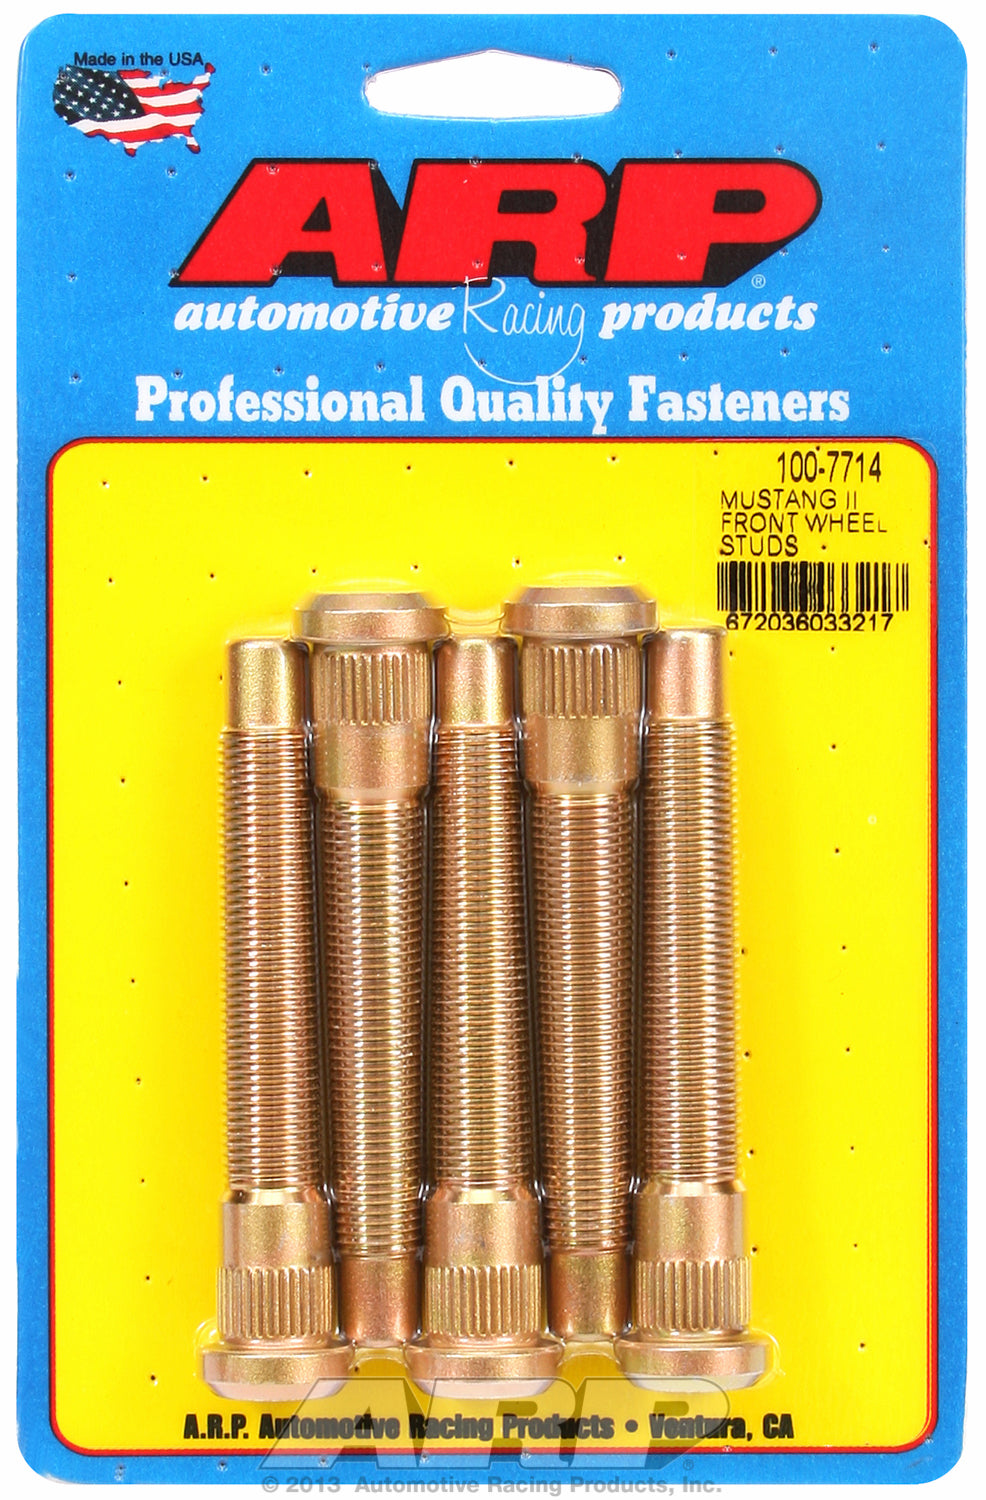 Wheel Stud Kit for Ford Mustang II Front Wheel